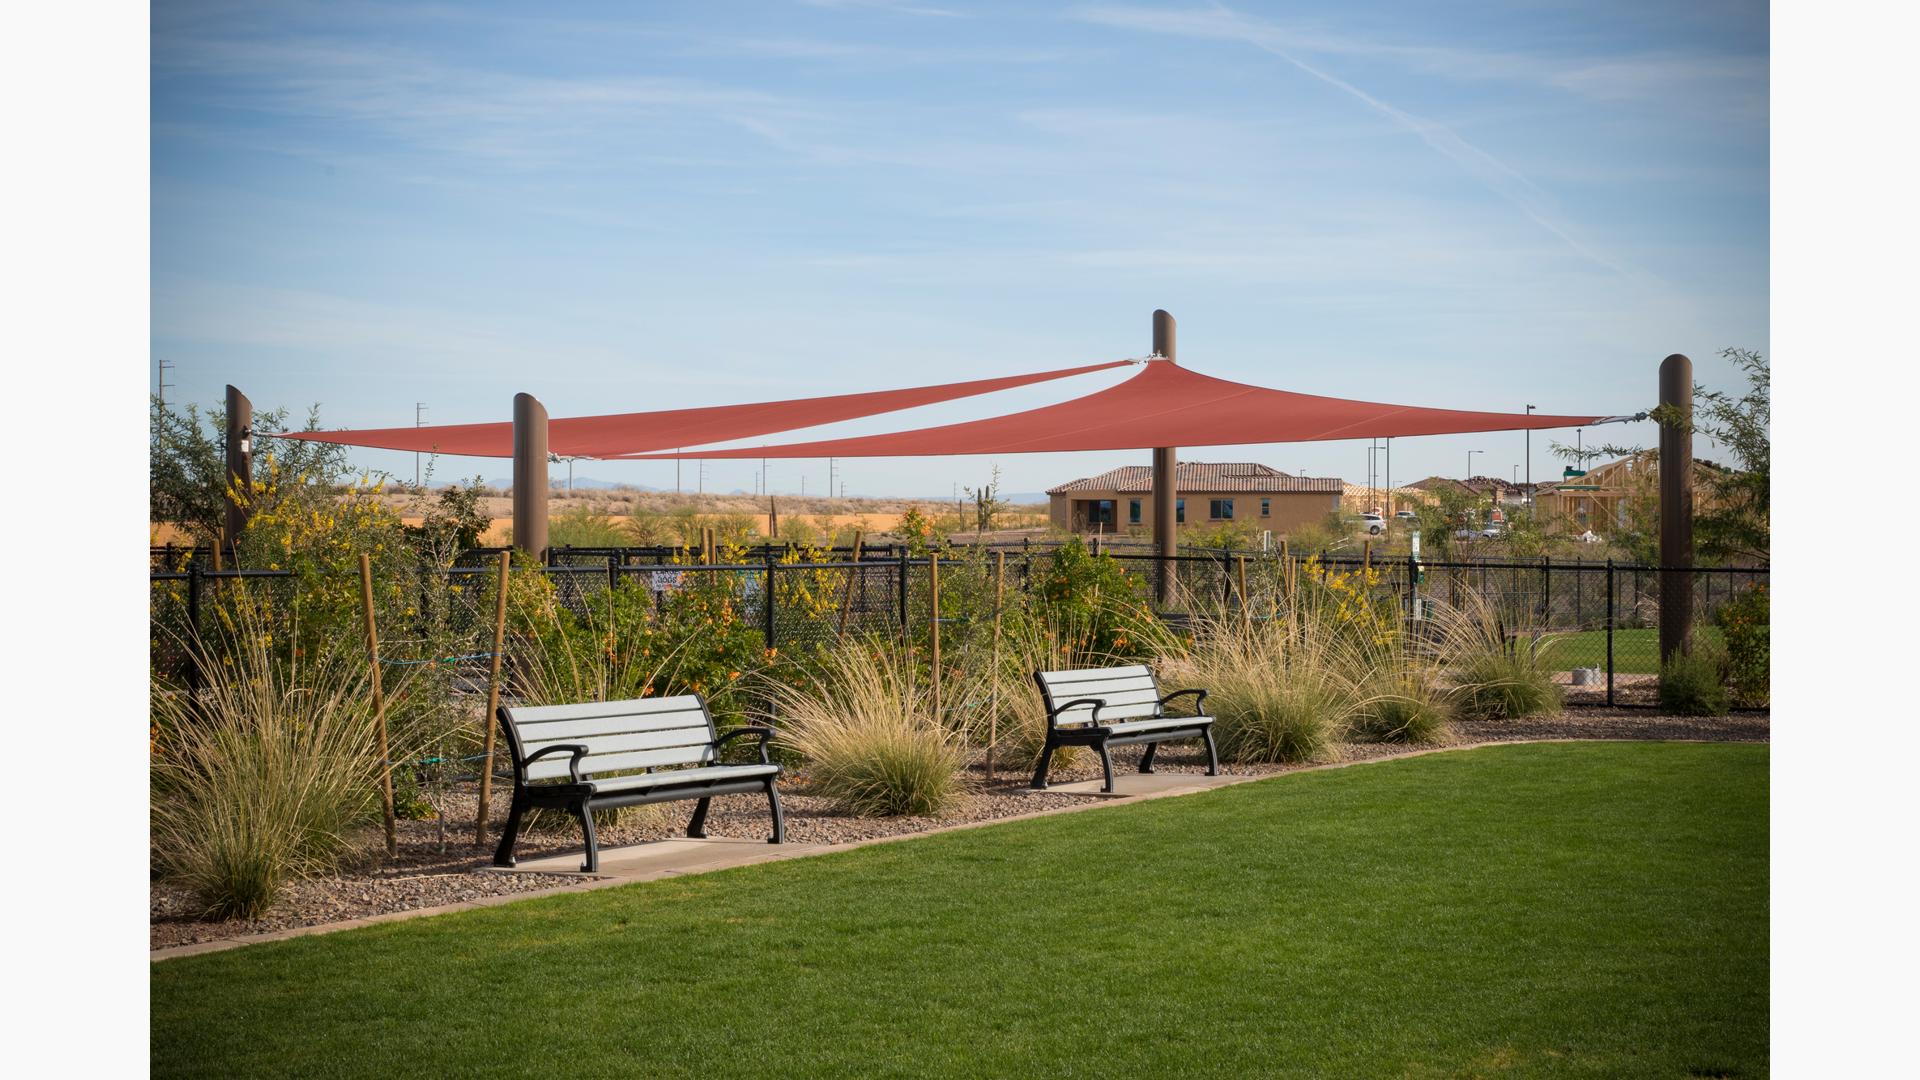 Two benches under two maroon colored shade sails.